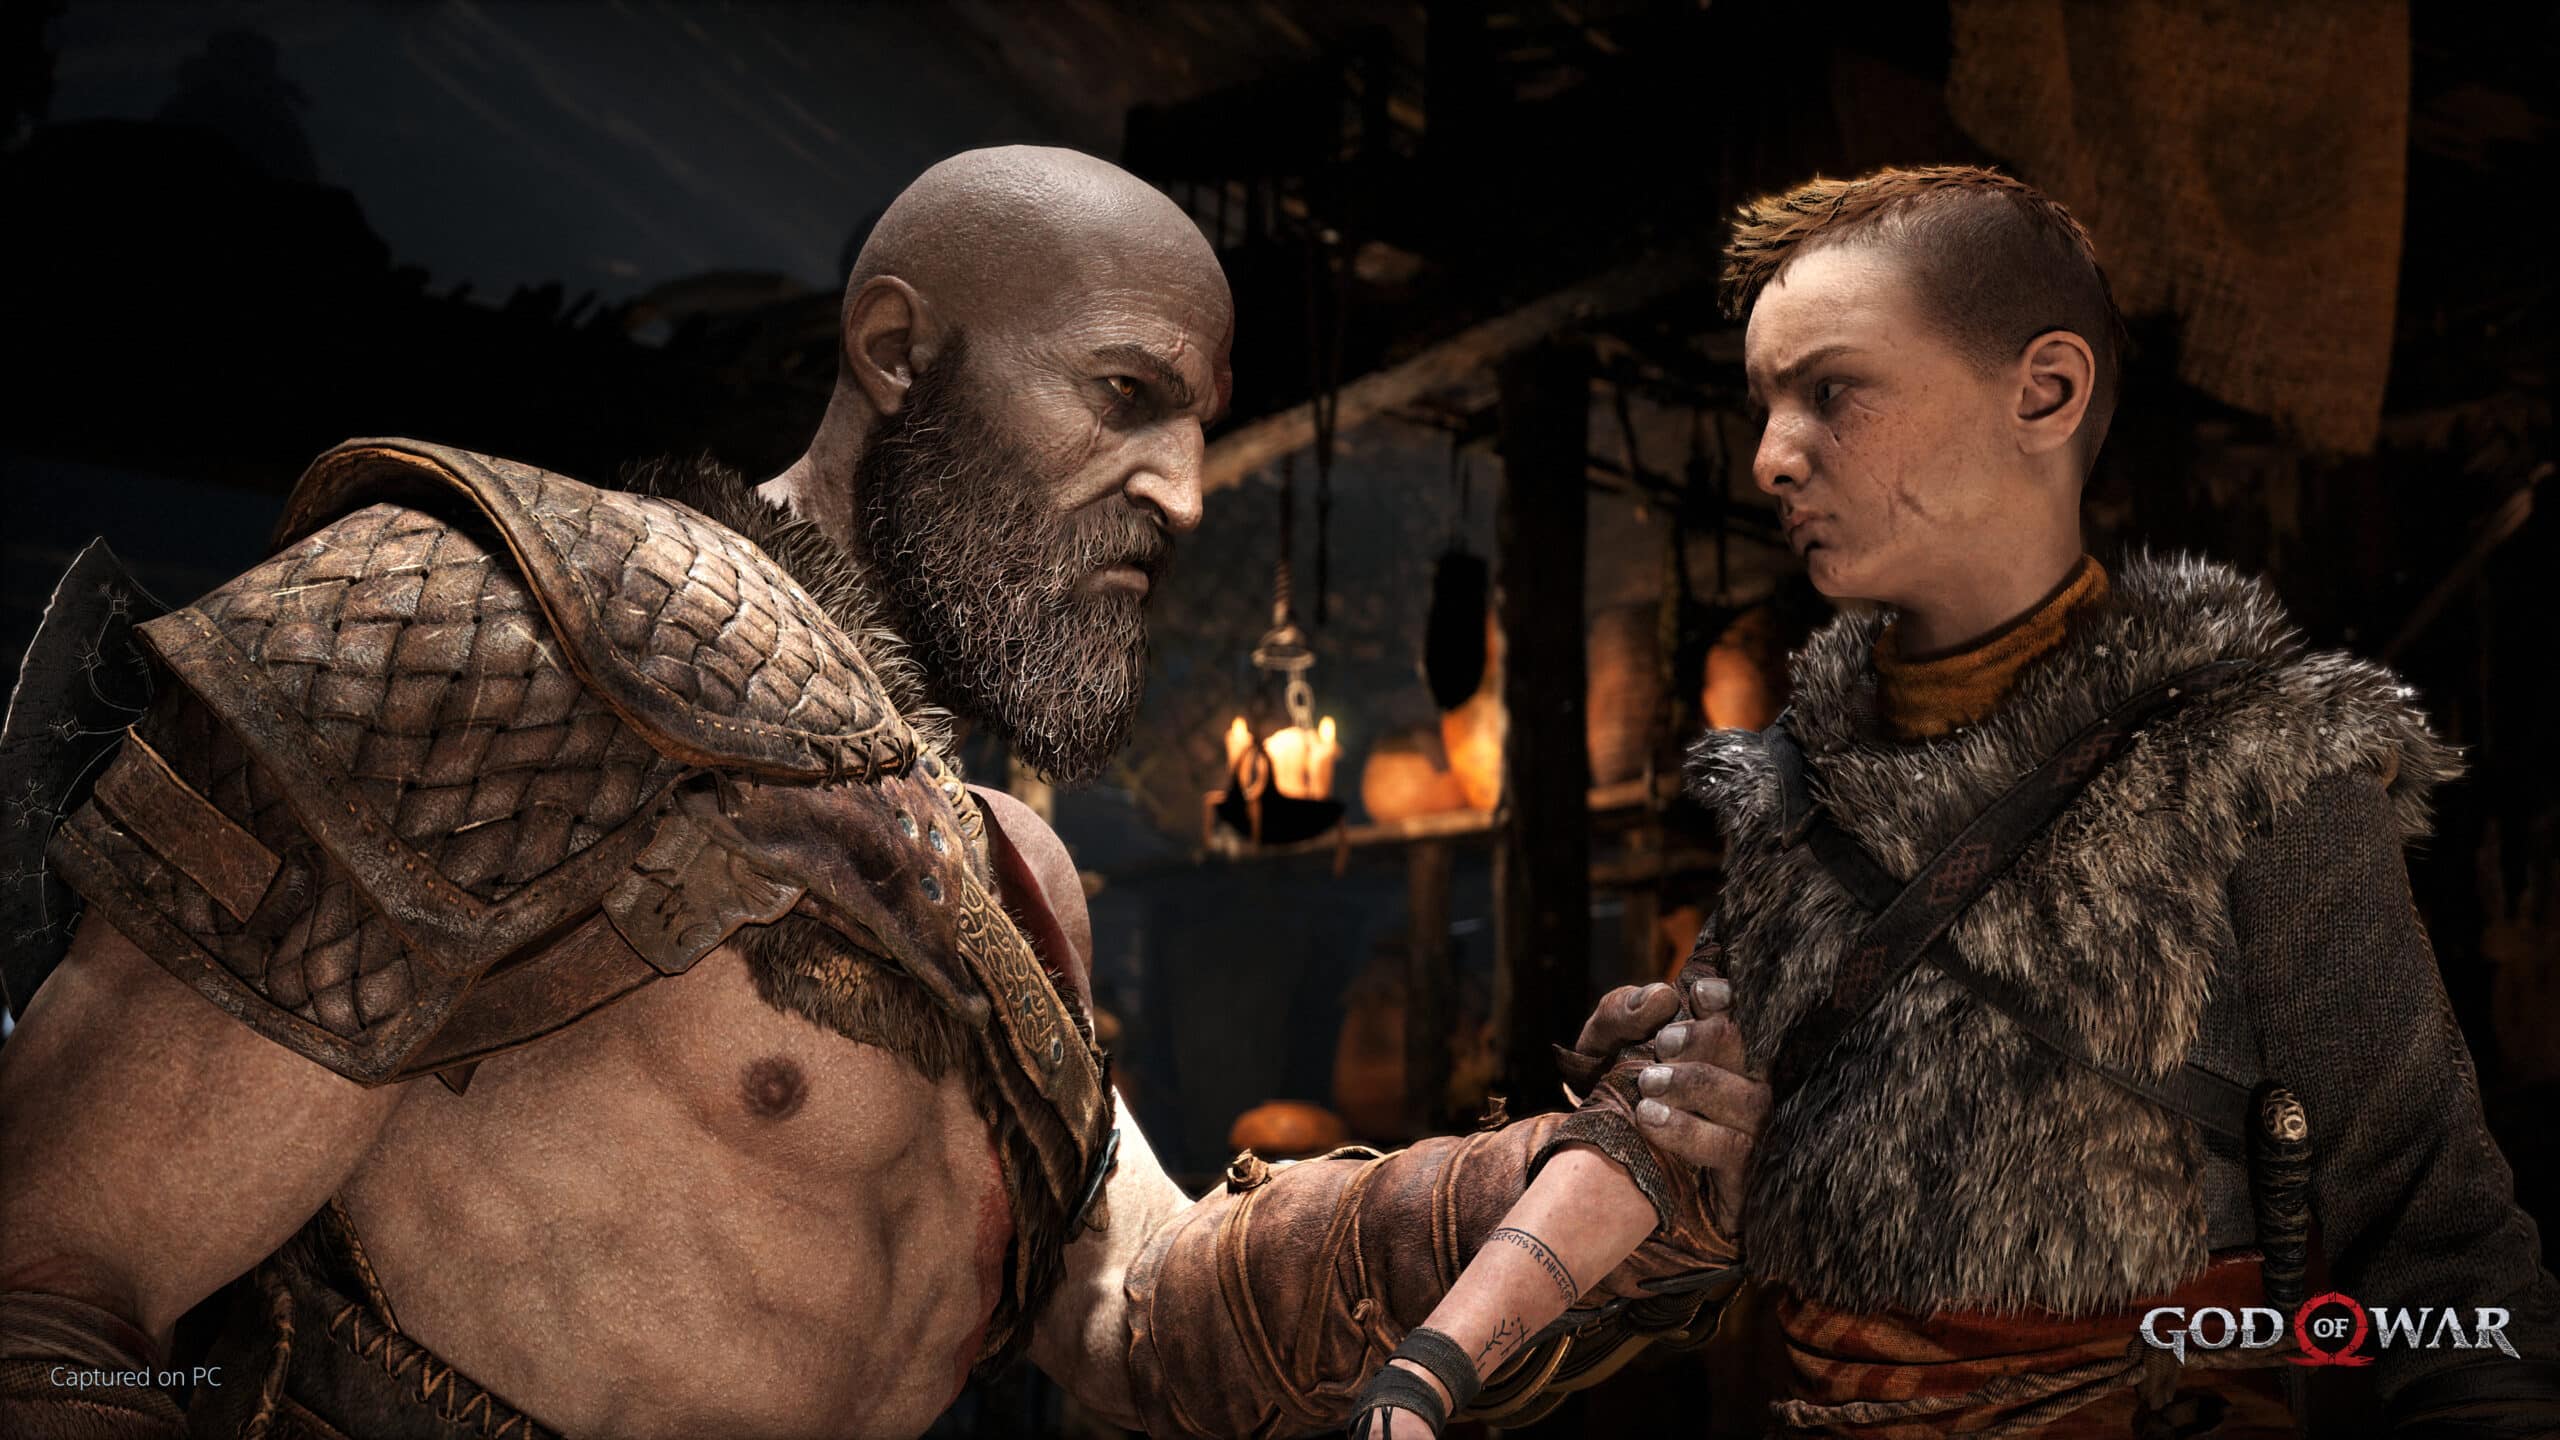 God of War coming to PC in 2022